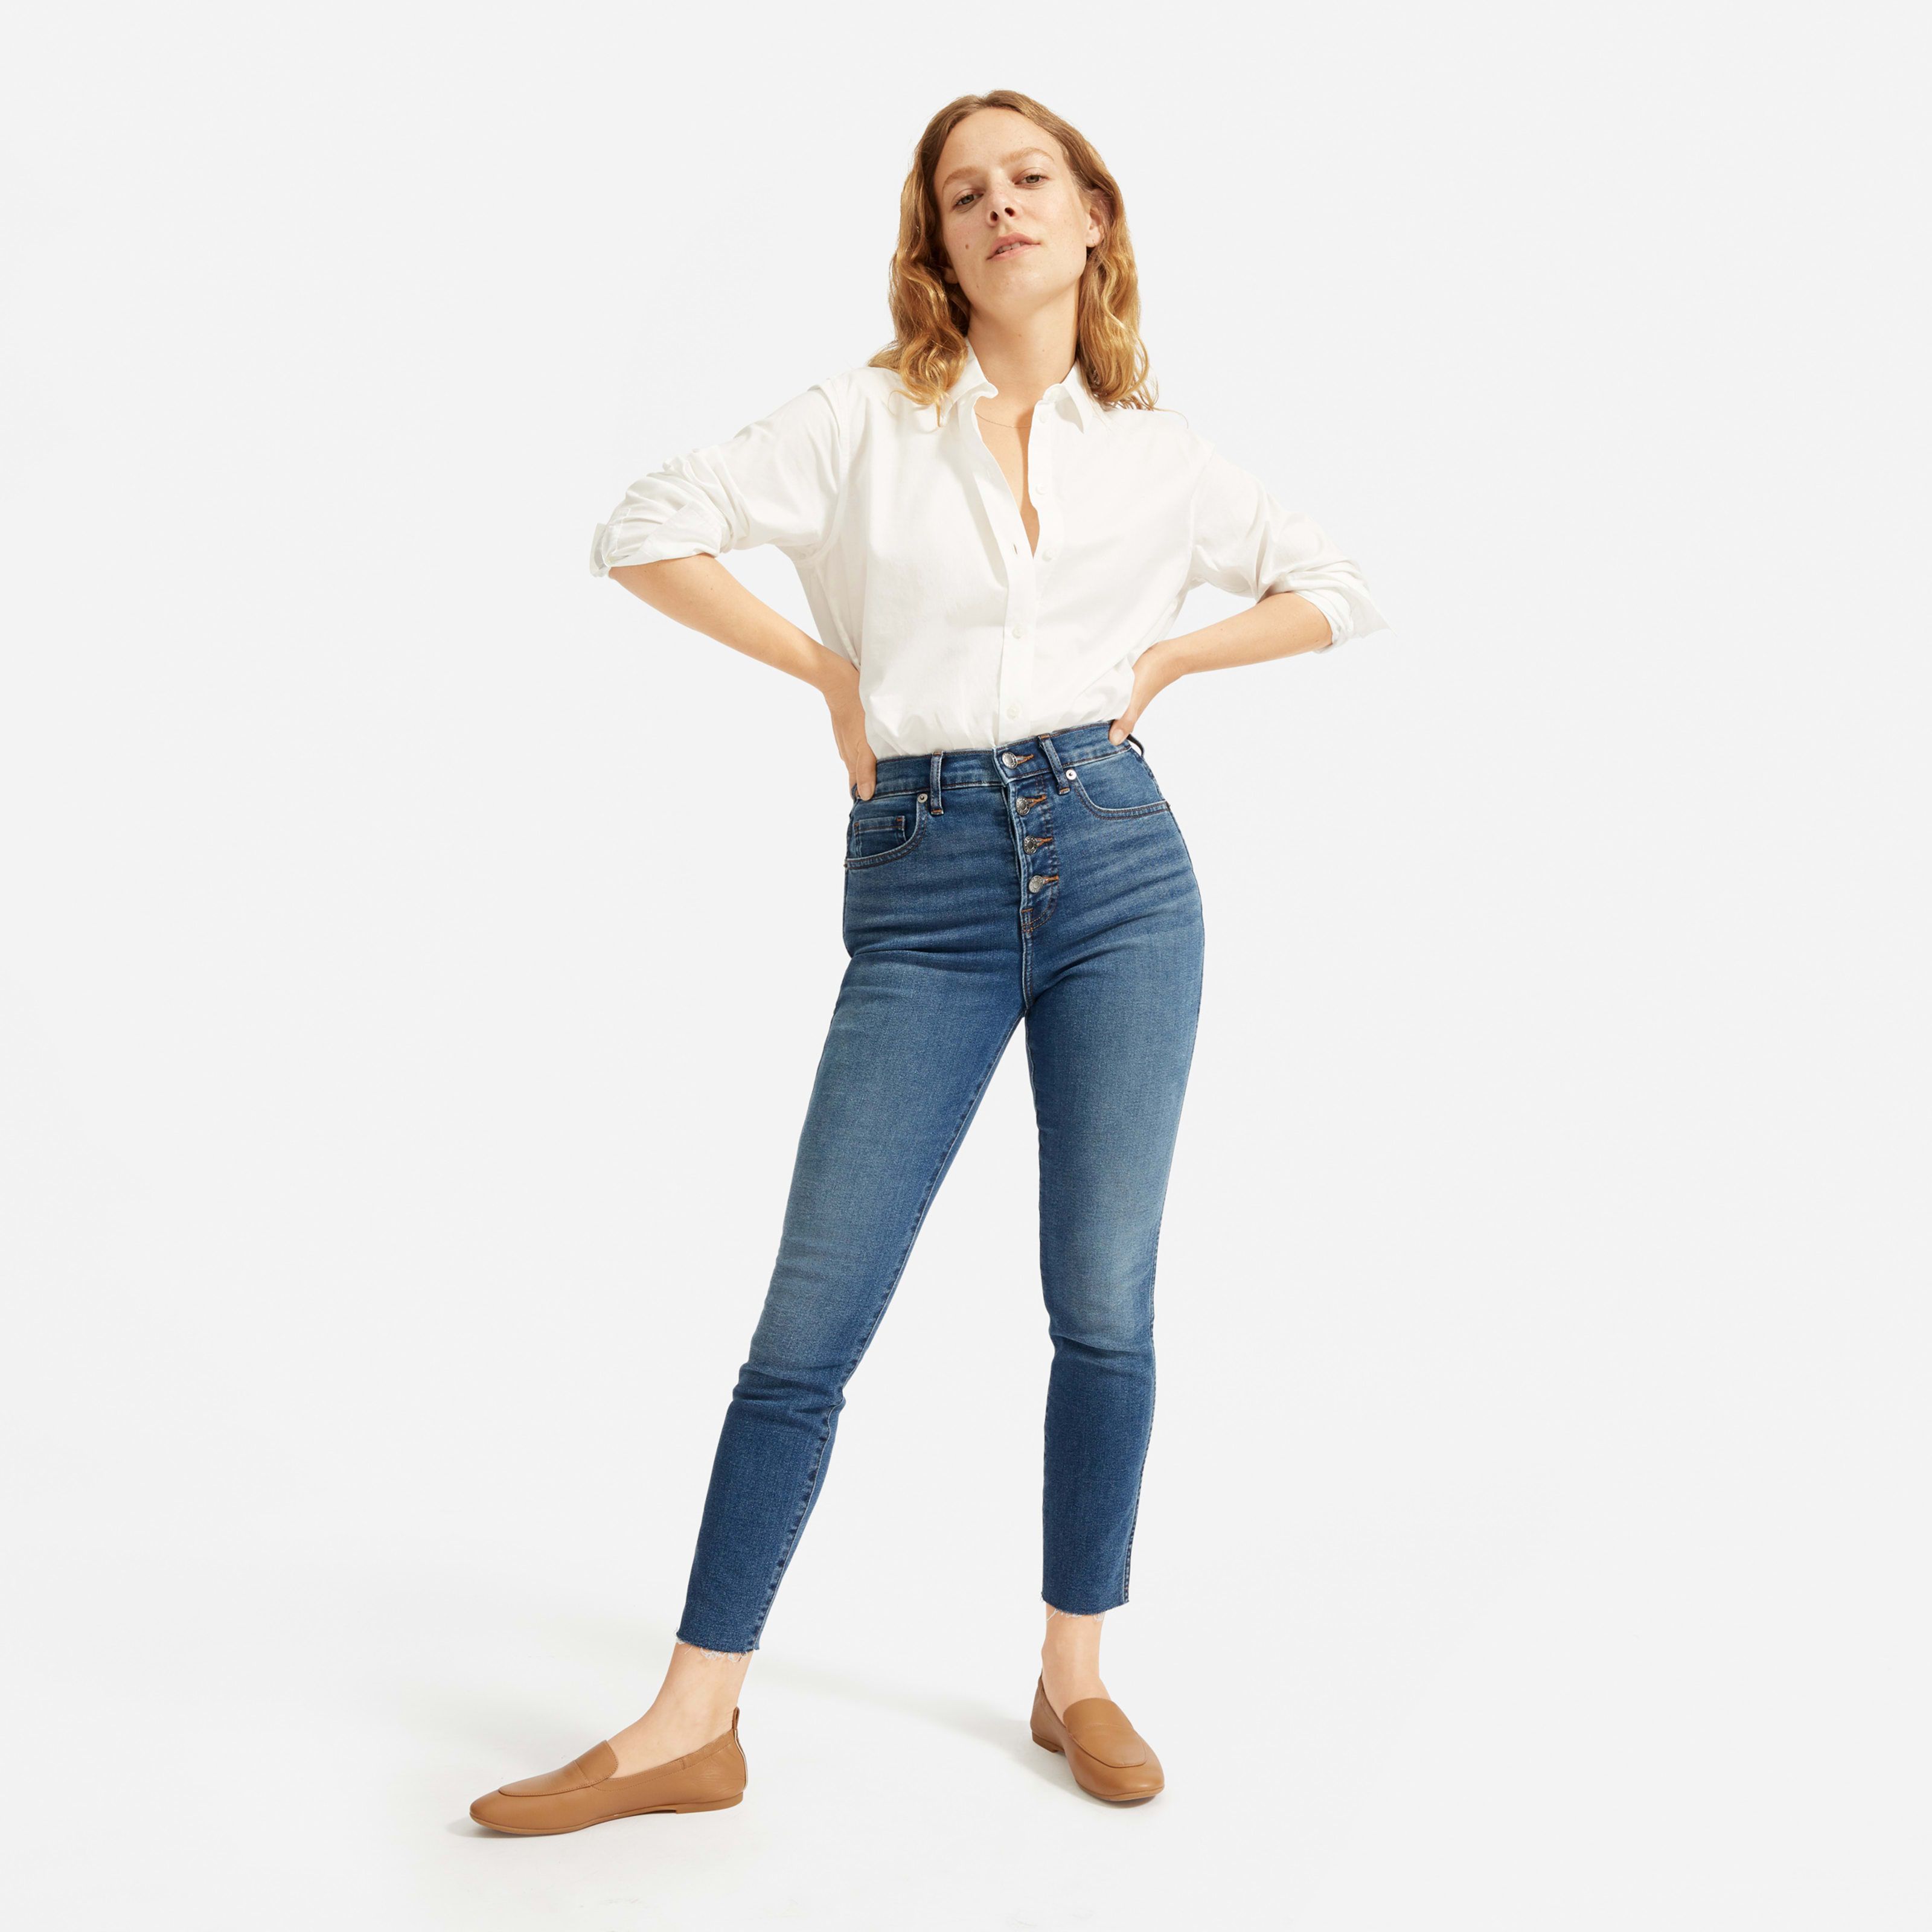 Women's Authentic Stretch High-Rise Skinny Button Fly by Everlane in Vintage Mid Blue, Size 26 | Everlane